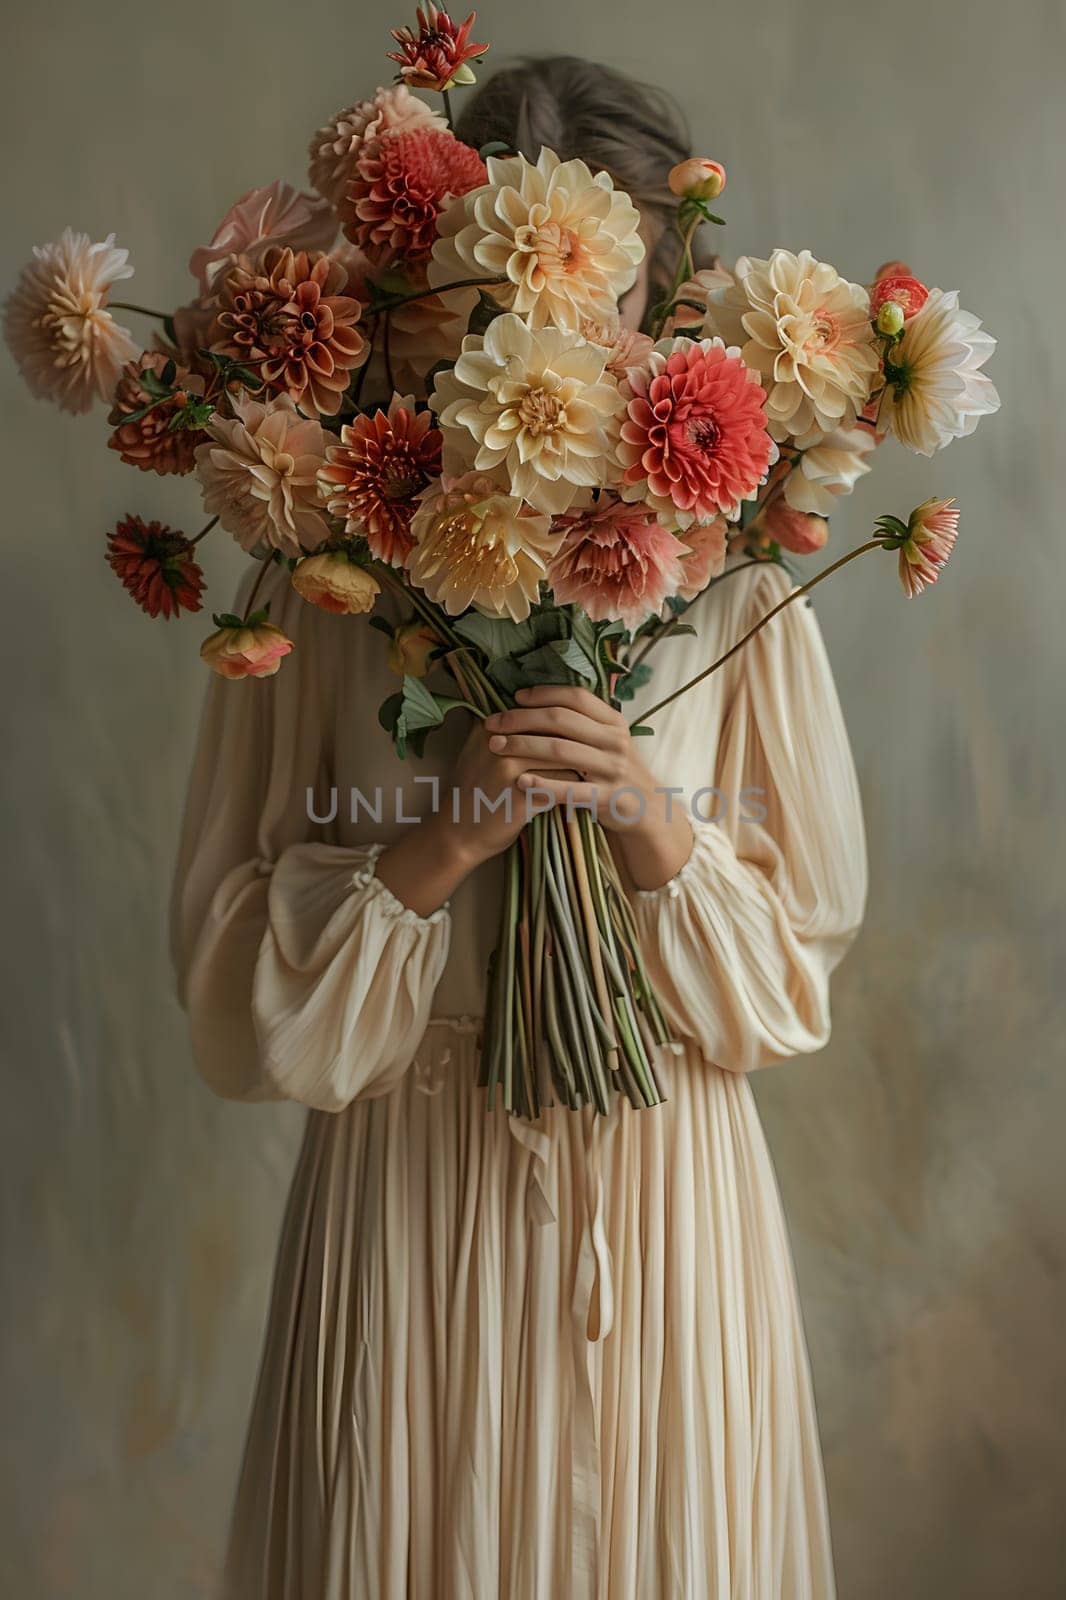 A woman in a dress creatively holding a bouquet of peach roses in front of her face, showcasing her love for flower arranging and the beauty of the rose family